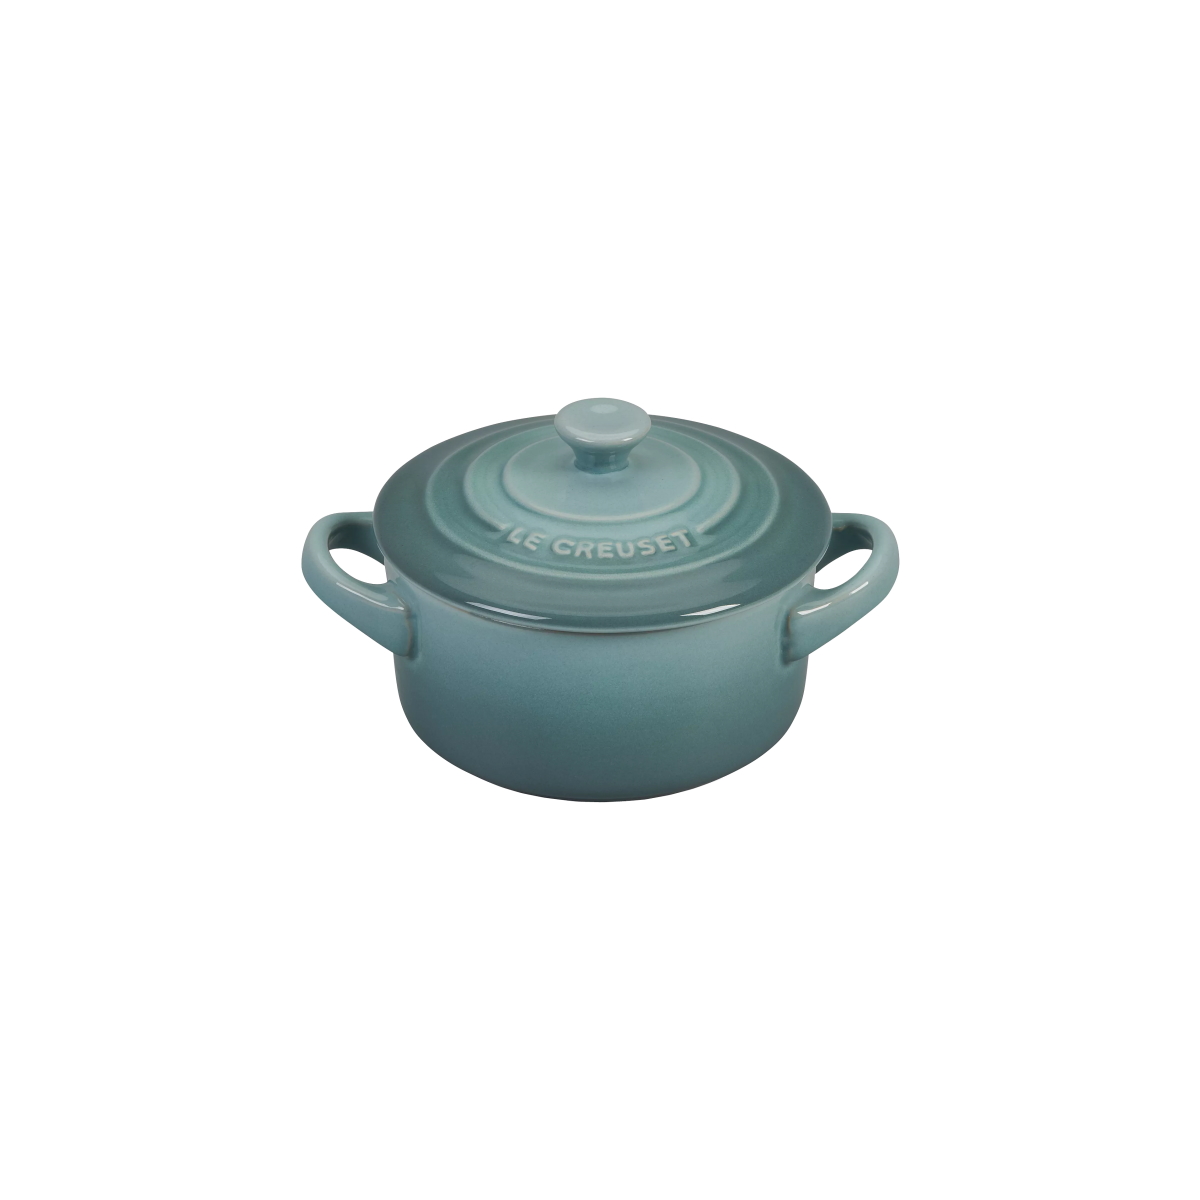 Le Creuset Stoneware Meringue 8 oz Round Cocotte with Cover - The